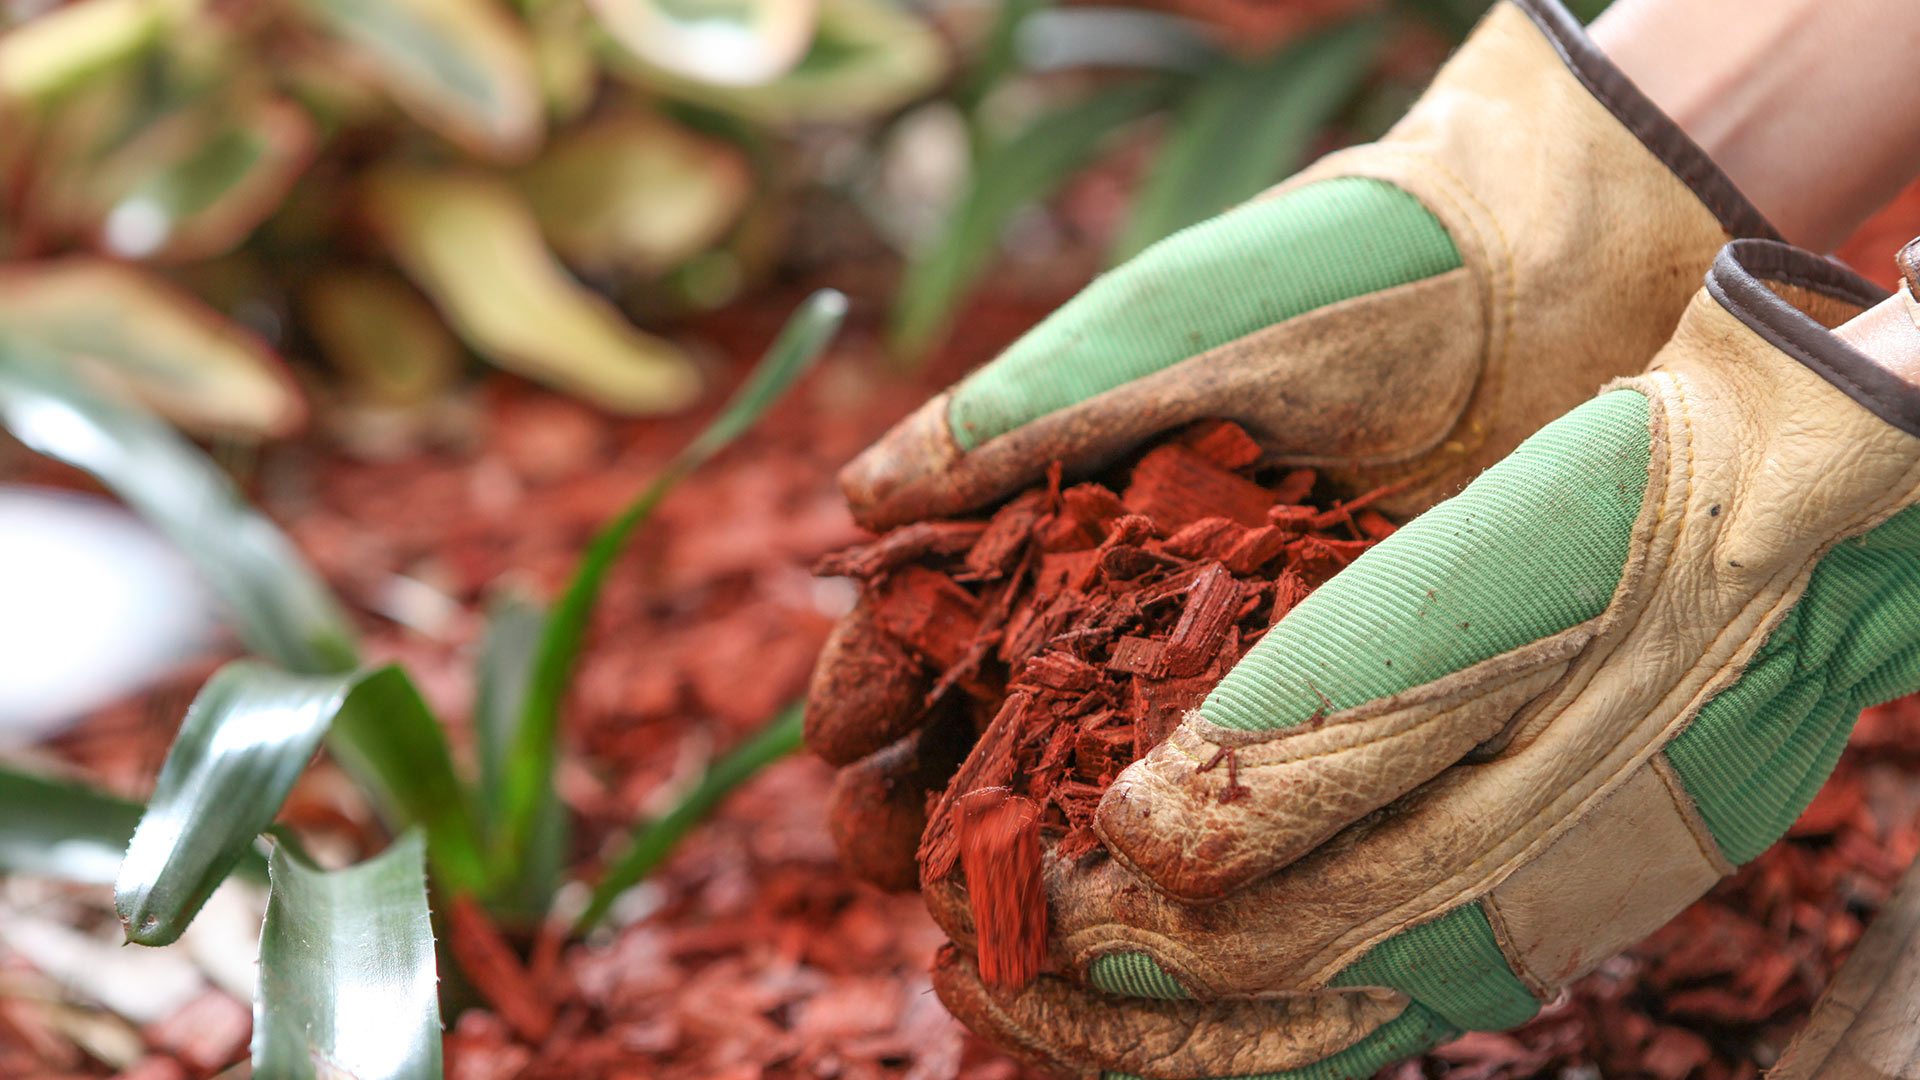 Don’t Let Winter Arrive without Protecting Your Gardens with Mulch